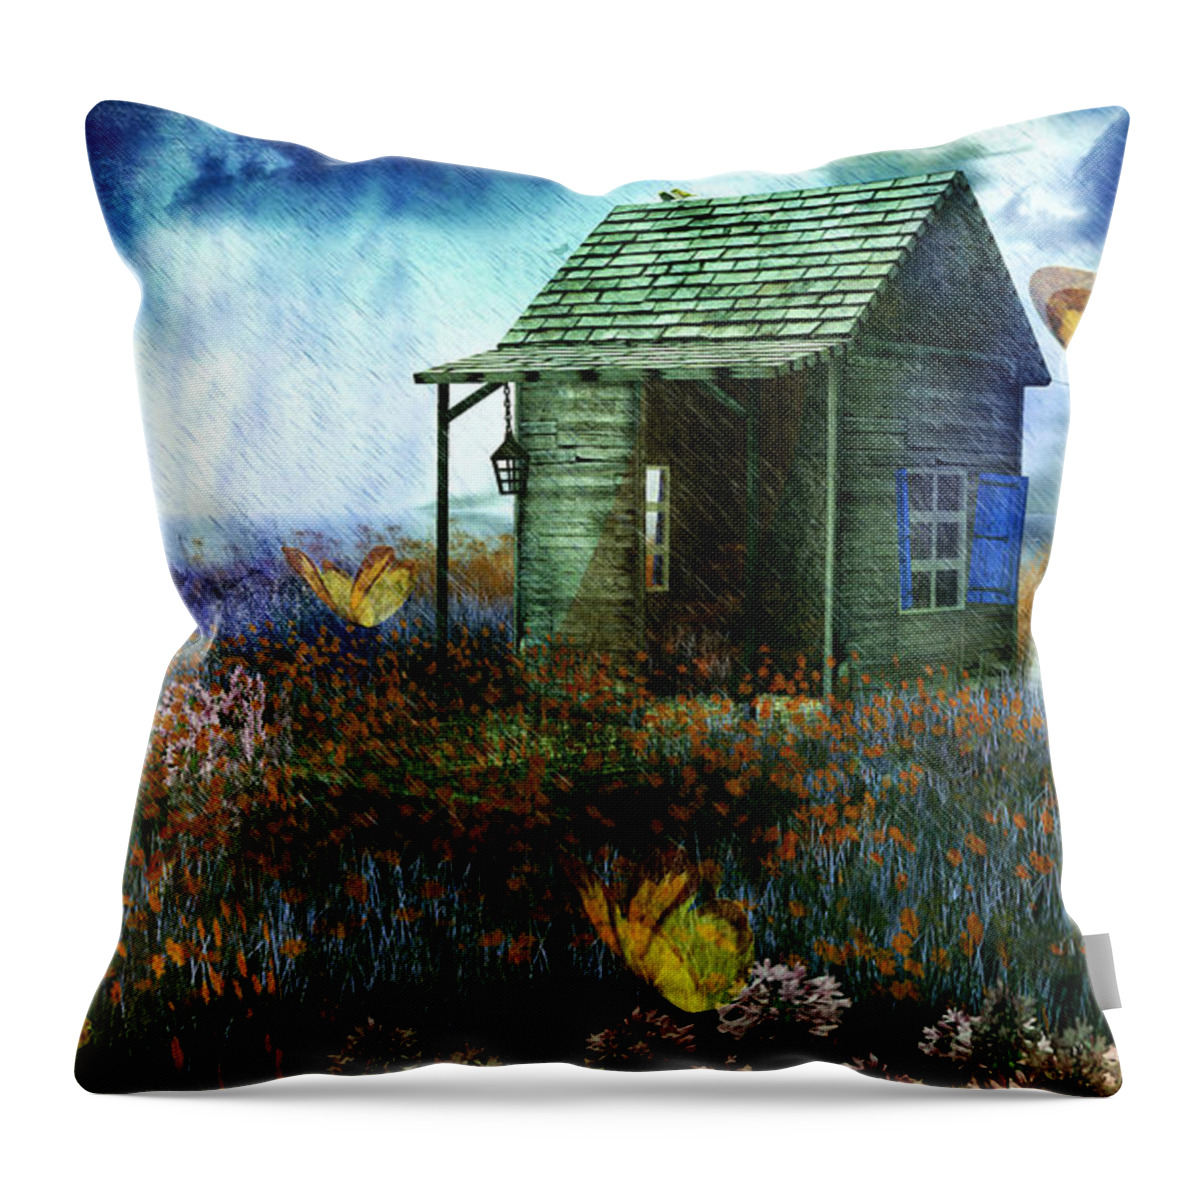 Storm Art Throw Pillow featuring the digital art Afternoon Deluge by Gallery Beguiled